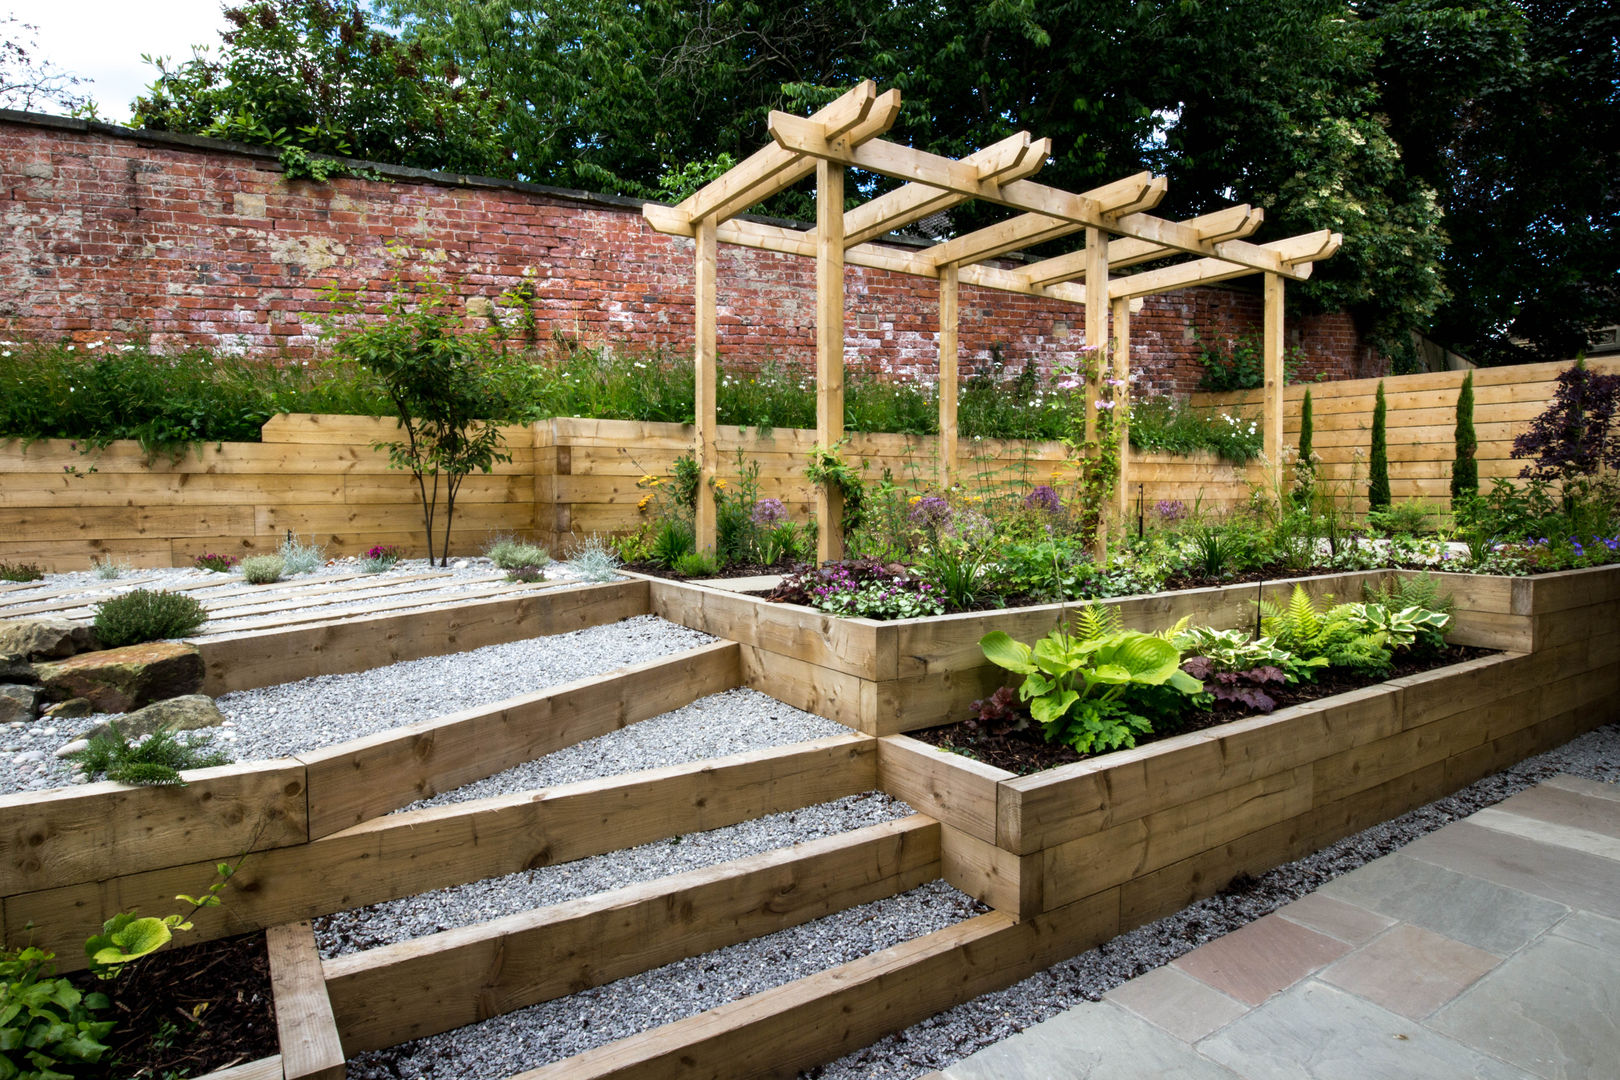 Modern Garden with a rustic twist Yorkshire Gardens Modern garden sleepers,railway sleepers,raised beds,pergola